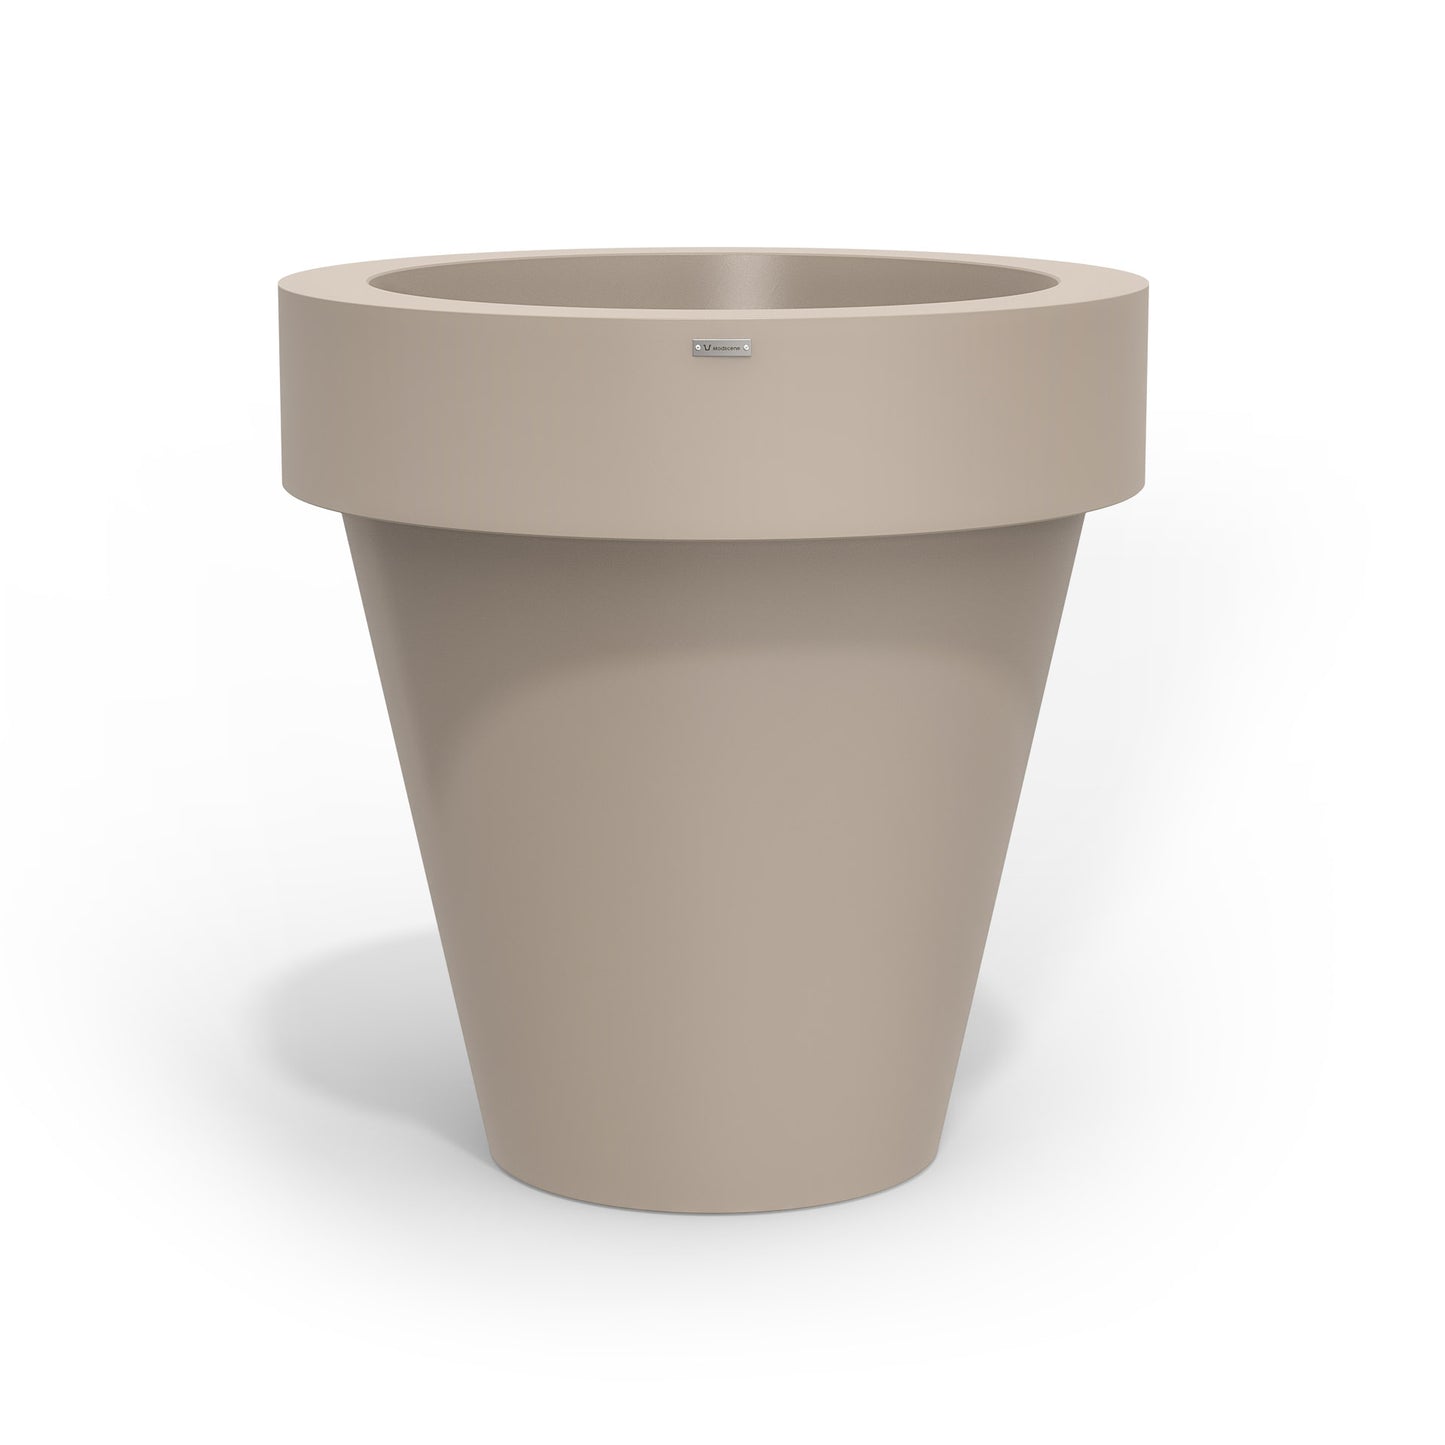 Extra large Modscene planter pot in a sandstone colour. Made in NZ.